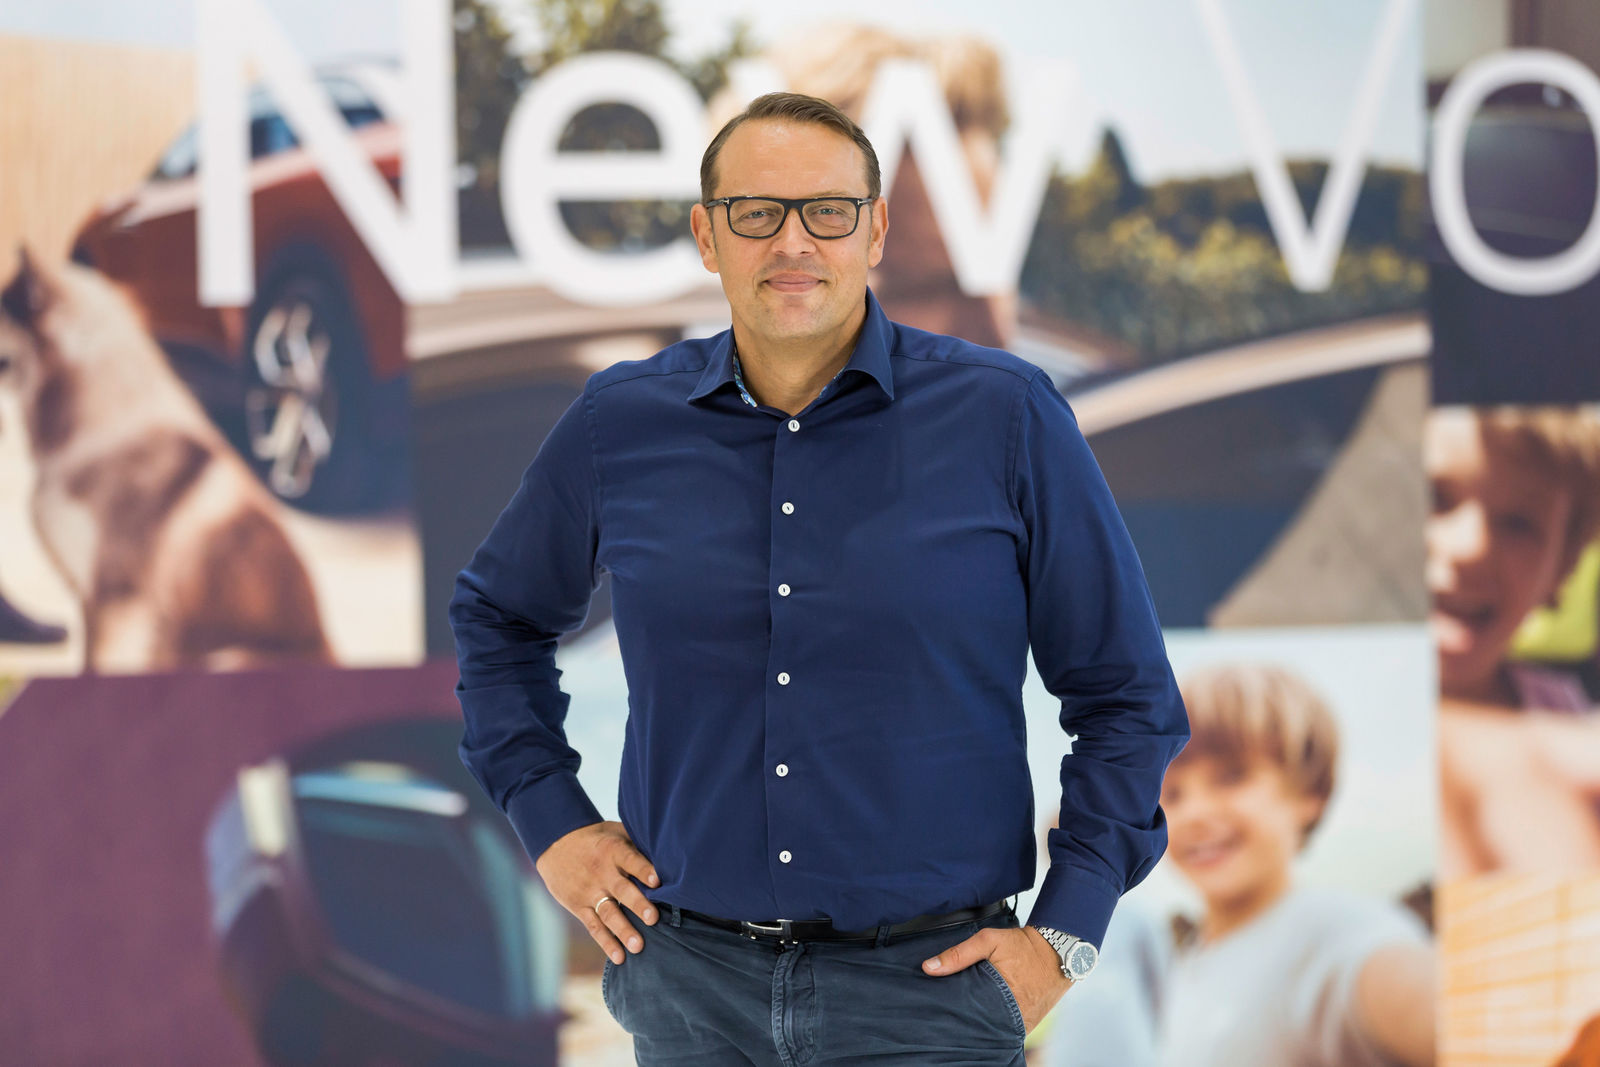 World premiere for “New Volkswagen” at the IAA